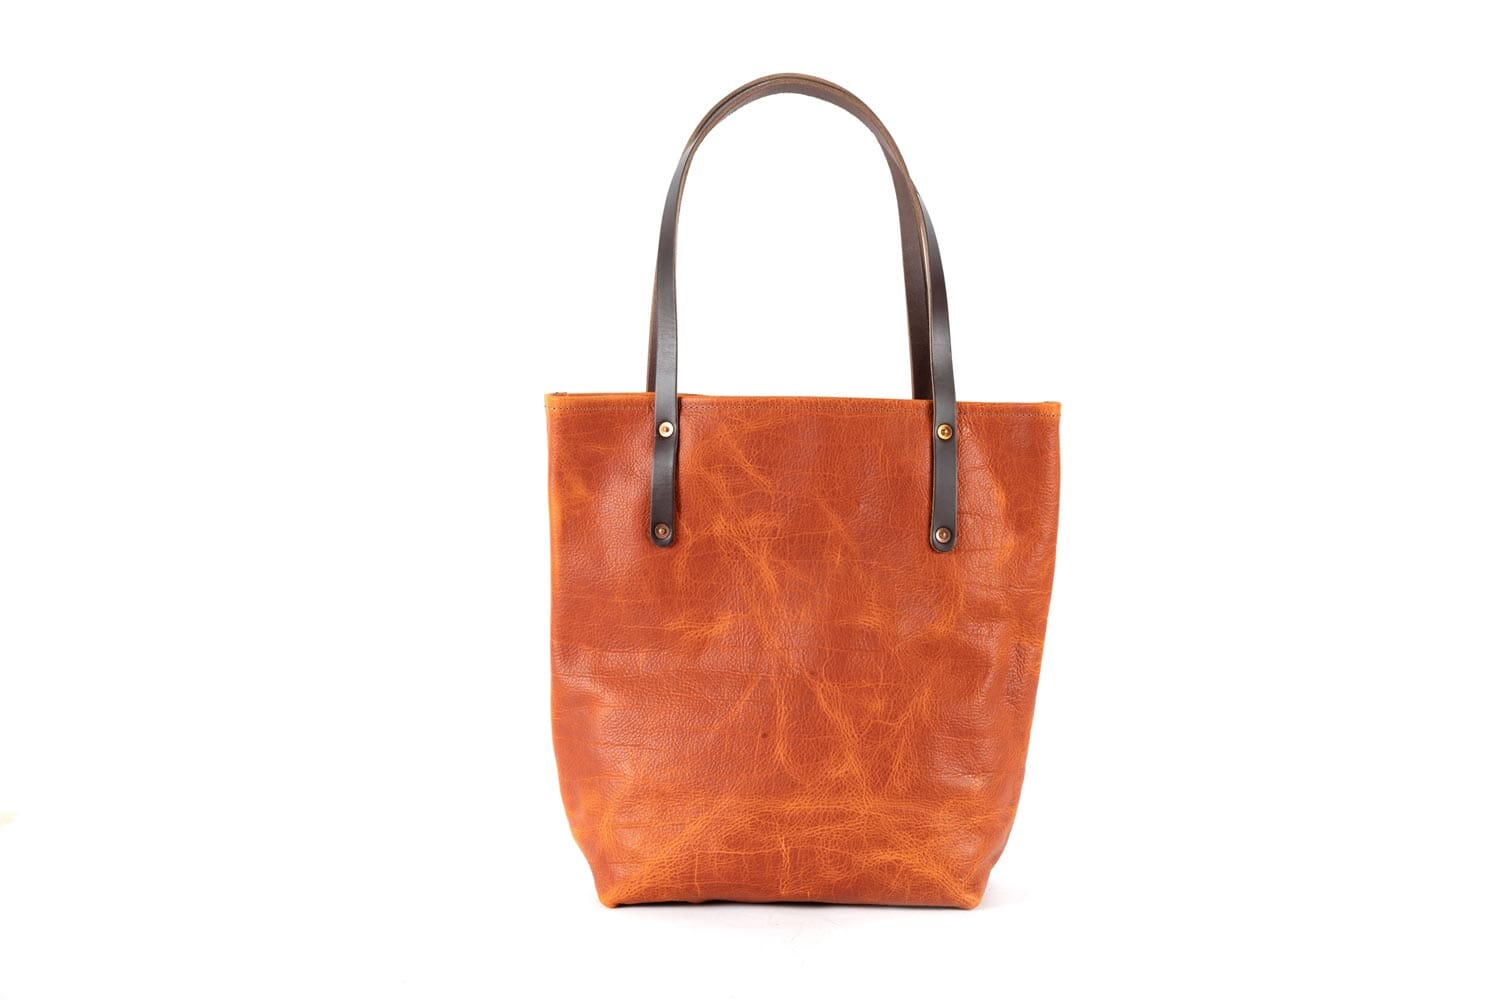 AVERY LEATHER TOTE BAG - SLIM LARGE - TANGERINE BISON (READY TO SHIP)